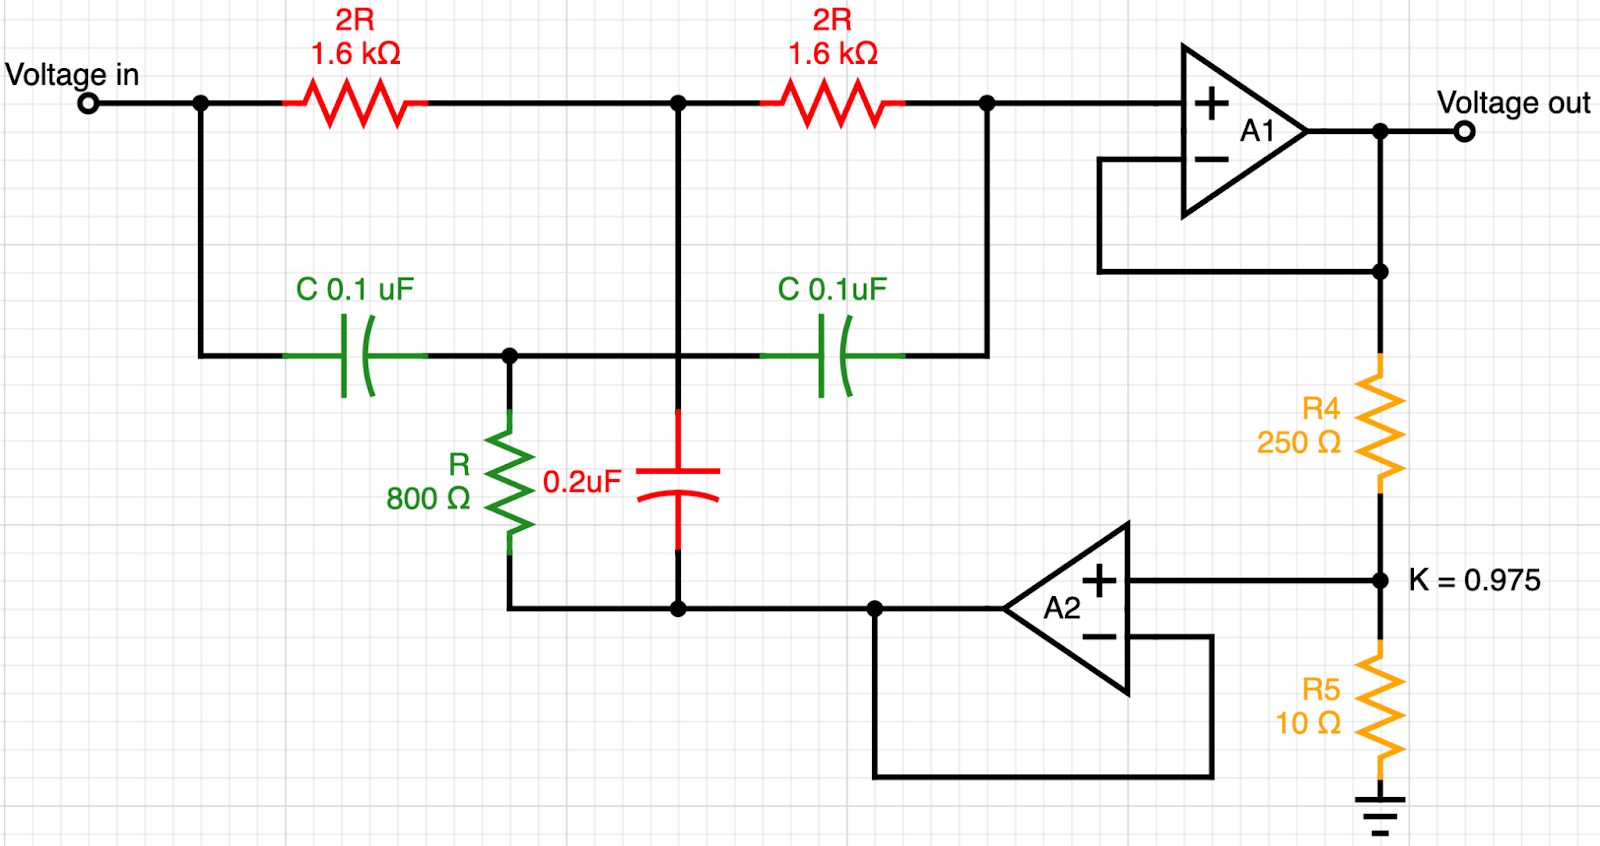 A two op-amp notch filter for a 20dB notch depth